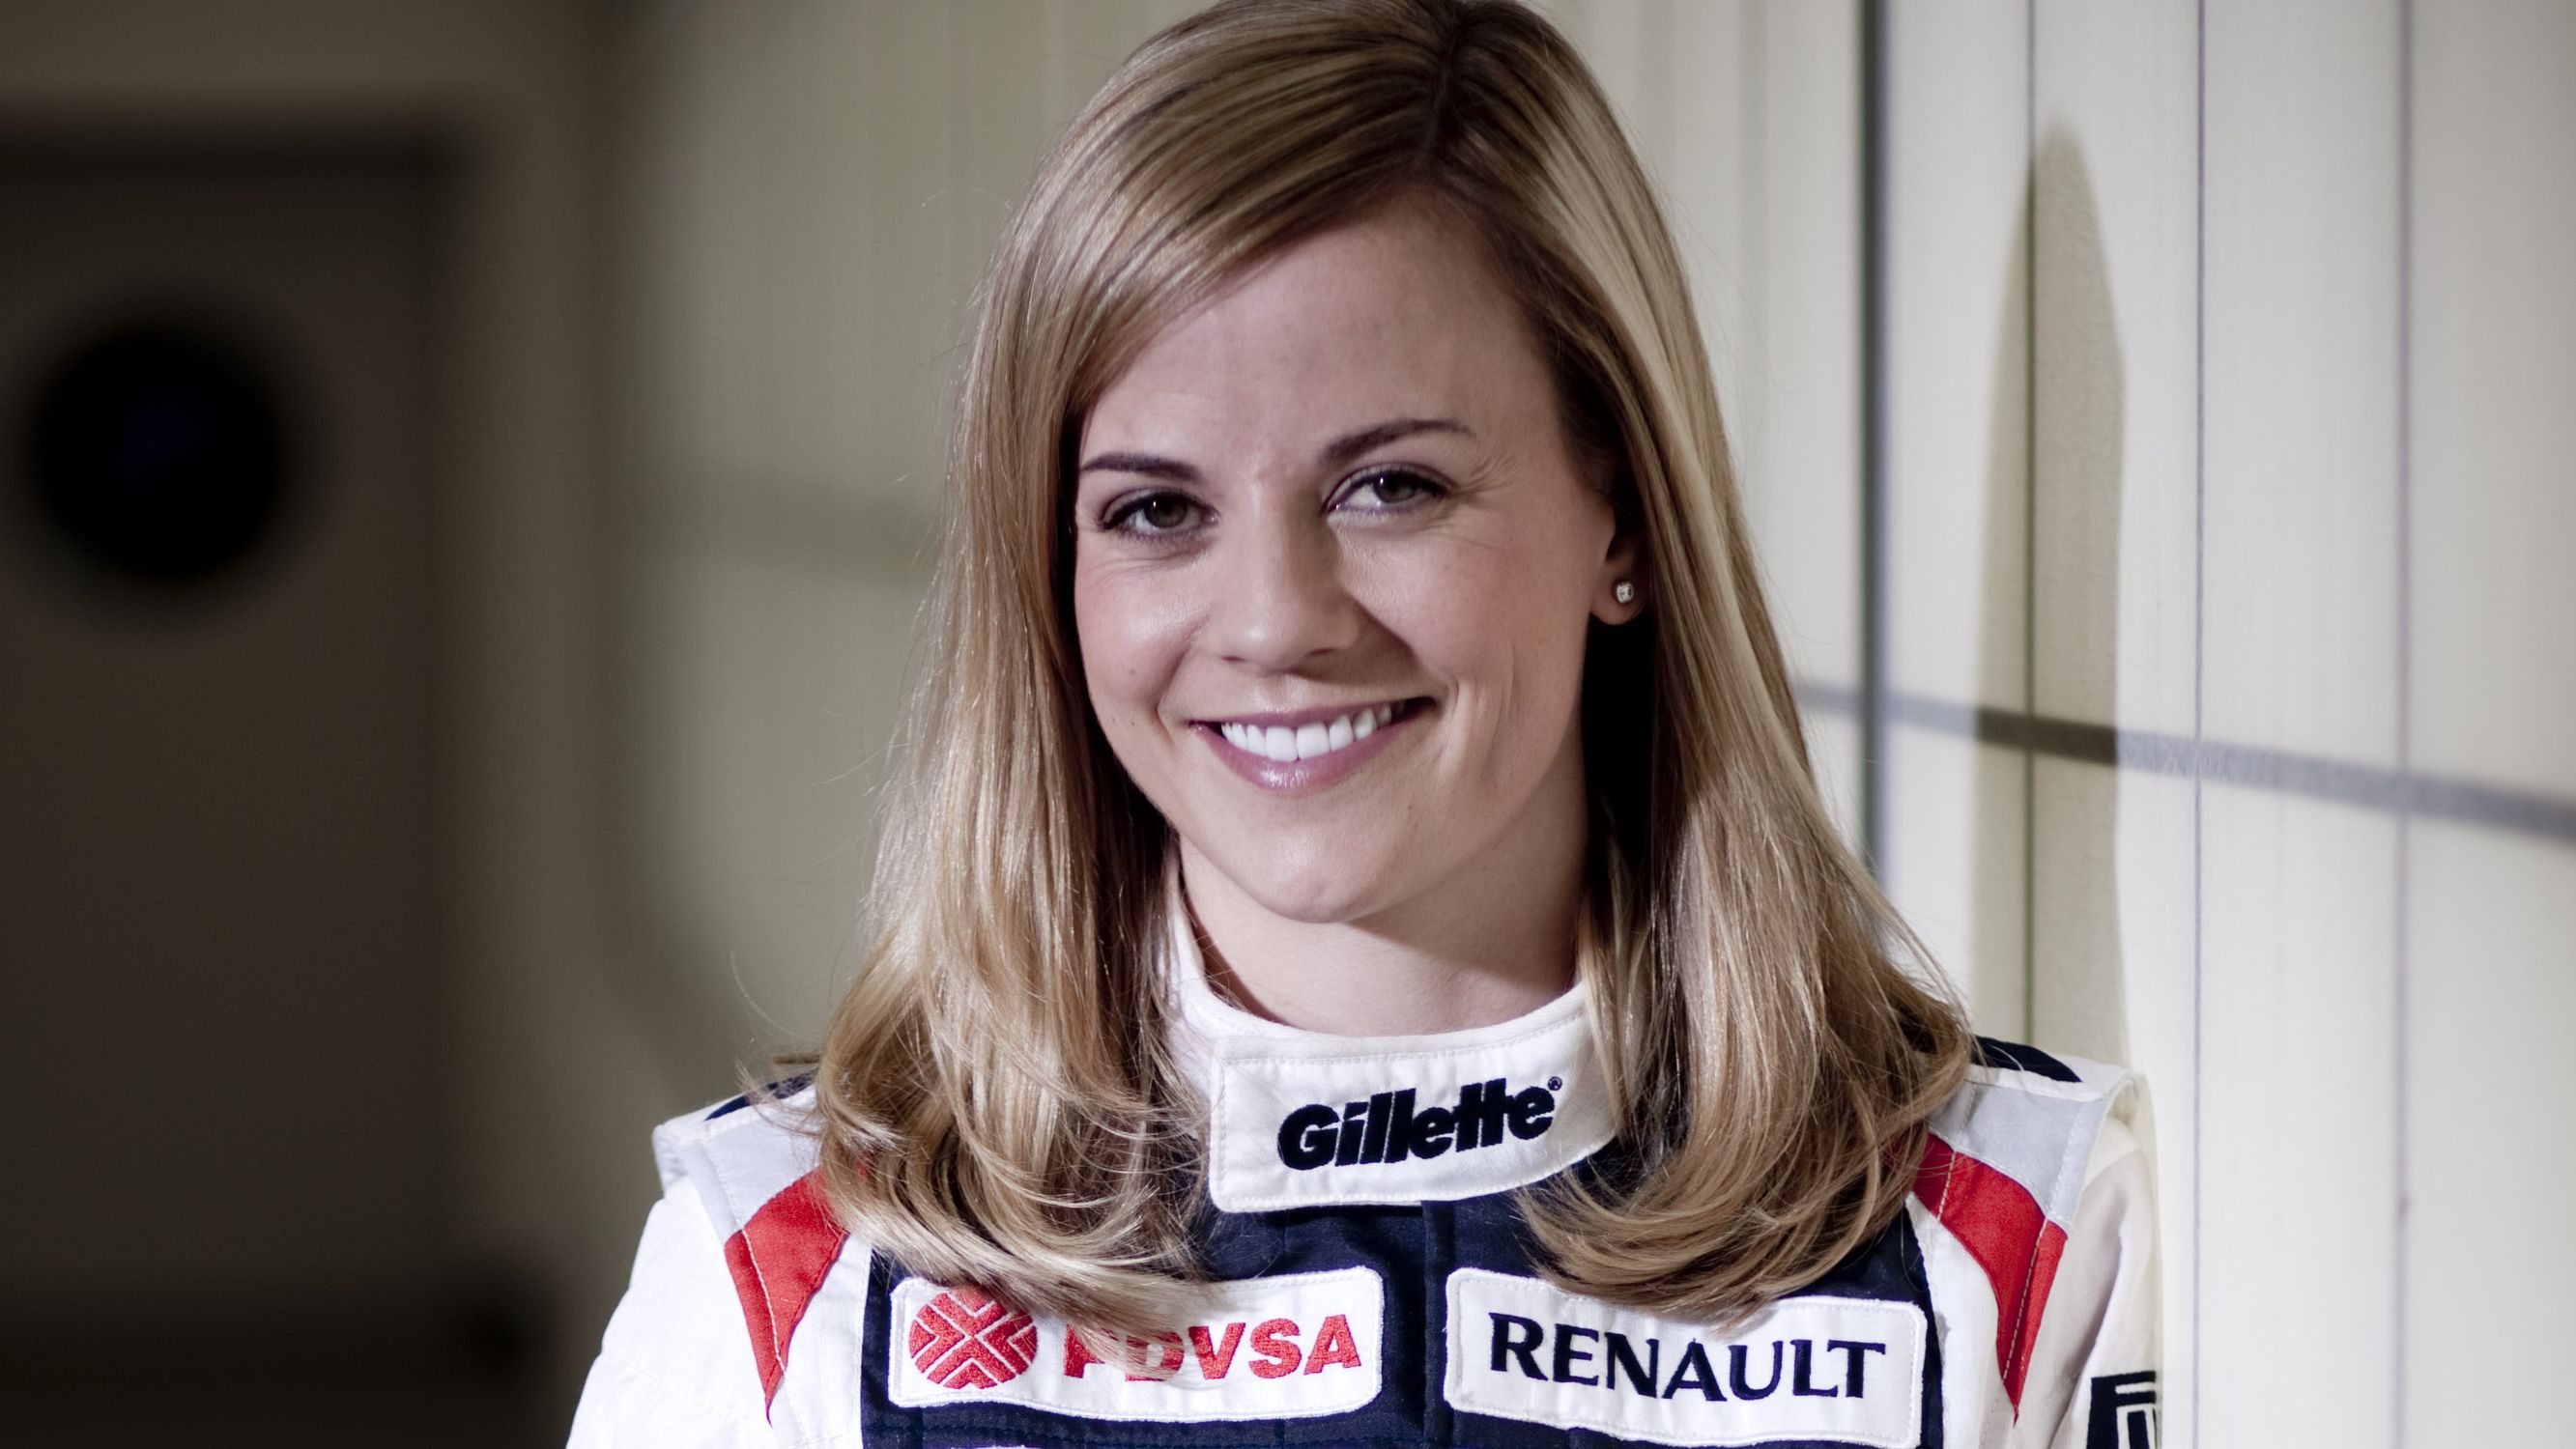 Scotland's Susie Wolff has been signed as a development driver at the Williams F1 team.